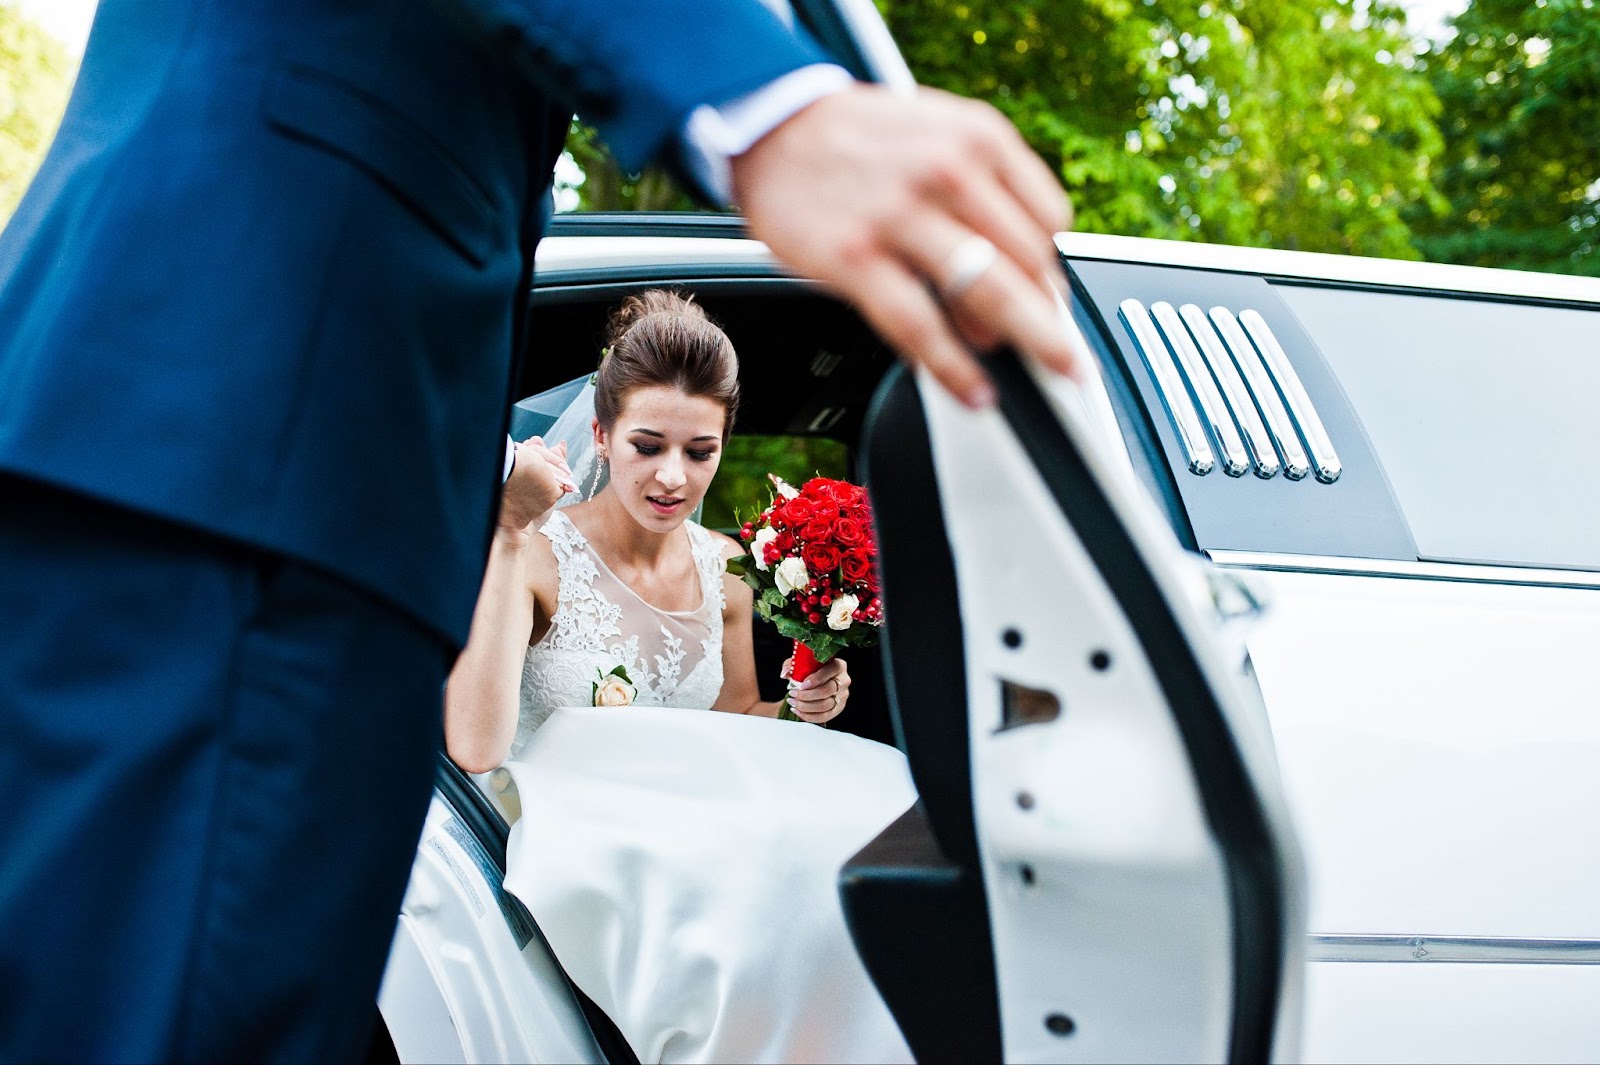 Why You Should Consider Limo Service for Weddings